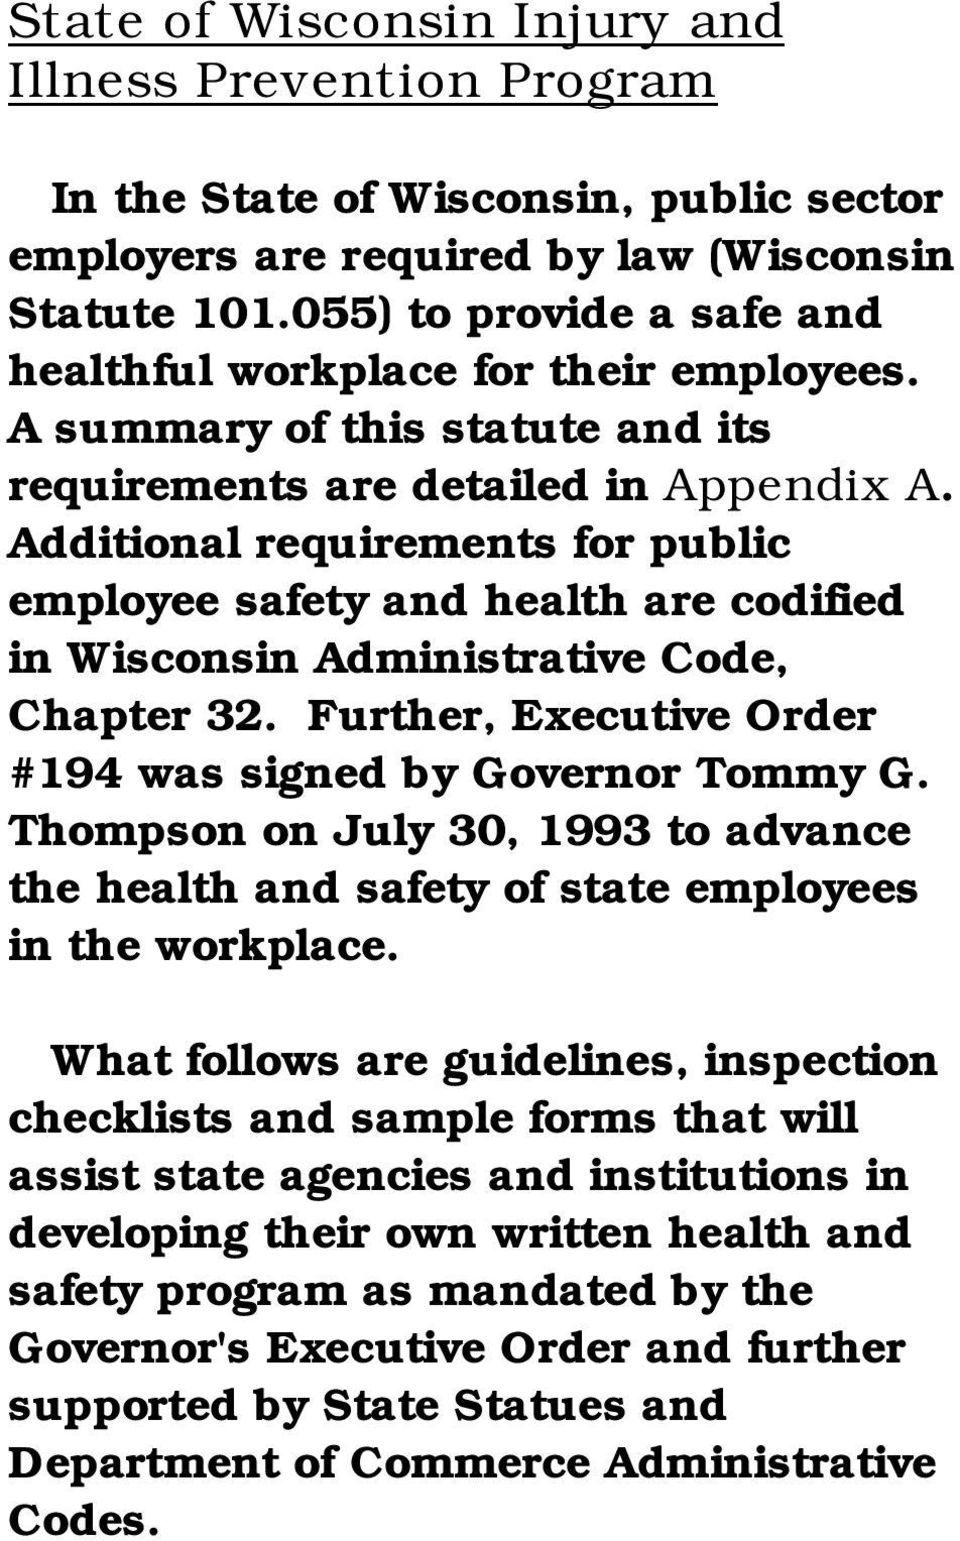 Additional requirements for public employee safety and health are codified in Wisconsin Administrative Code, Chapter 32. Further, Executive Order #194 was signed by Governor Tommy G.